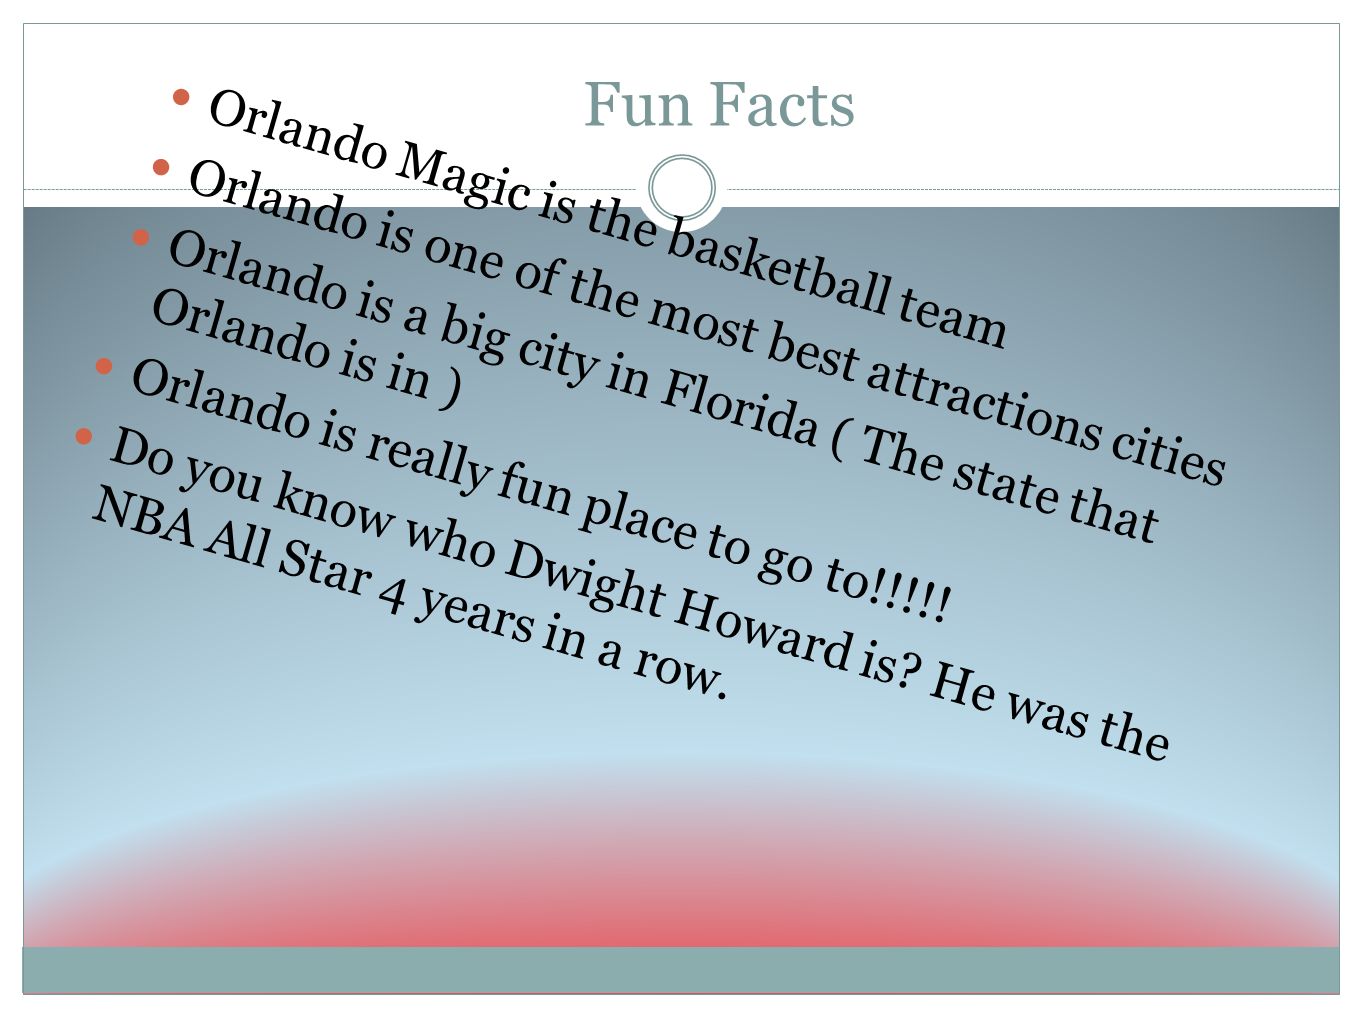 Fun Facts Orlando Magic is the basketball team Orlando is one of the most best attractions cities Orlando is a big city in Florida ( The state that Orlando is in ) Orlando is really fun place to go to!!!!.